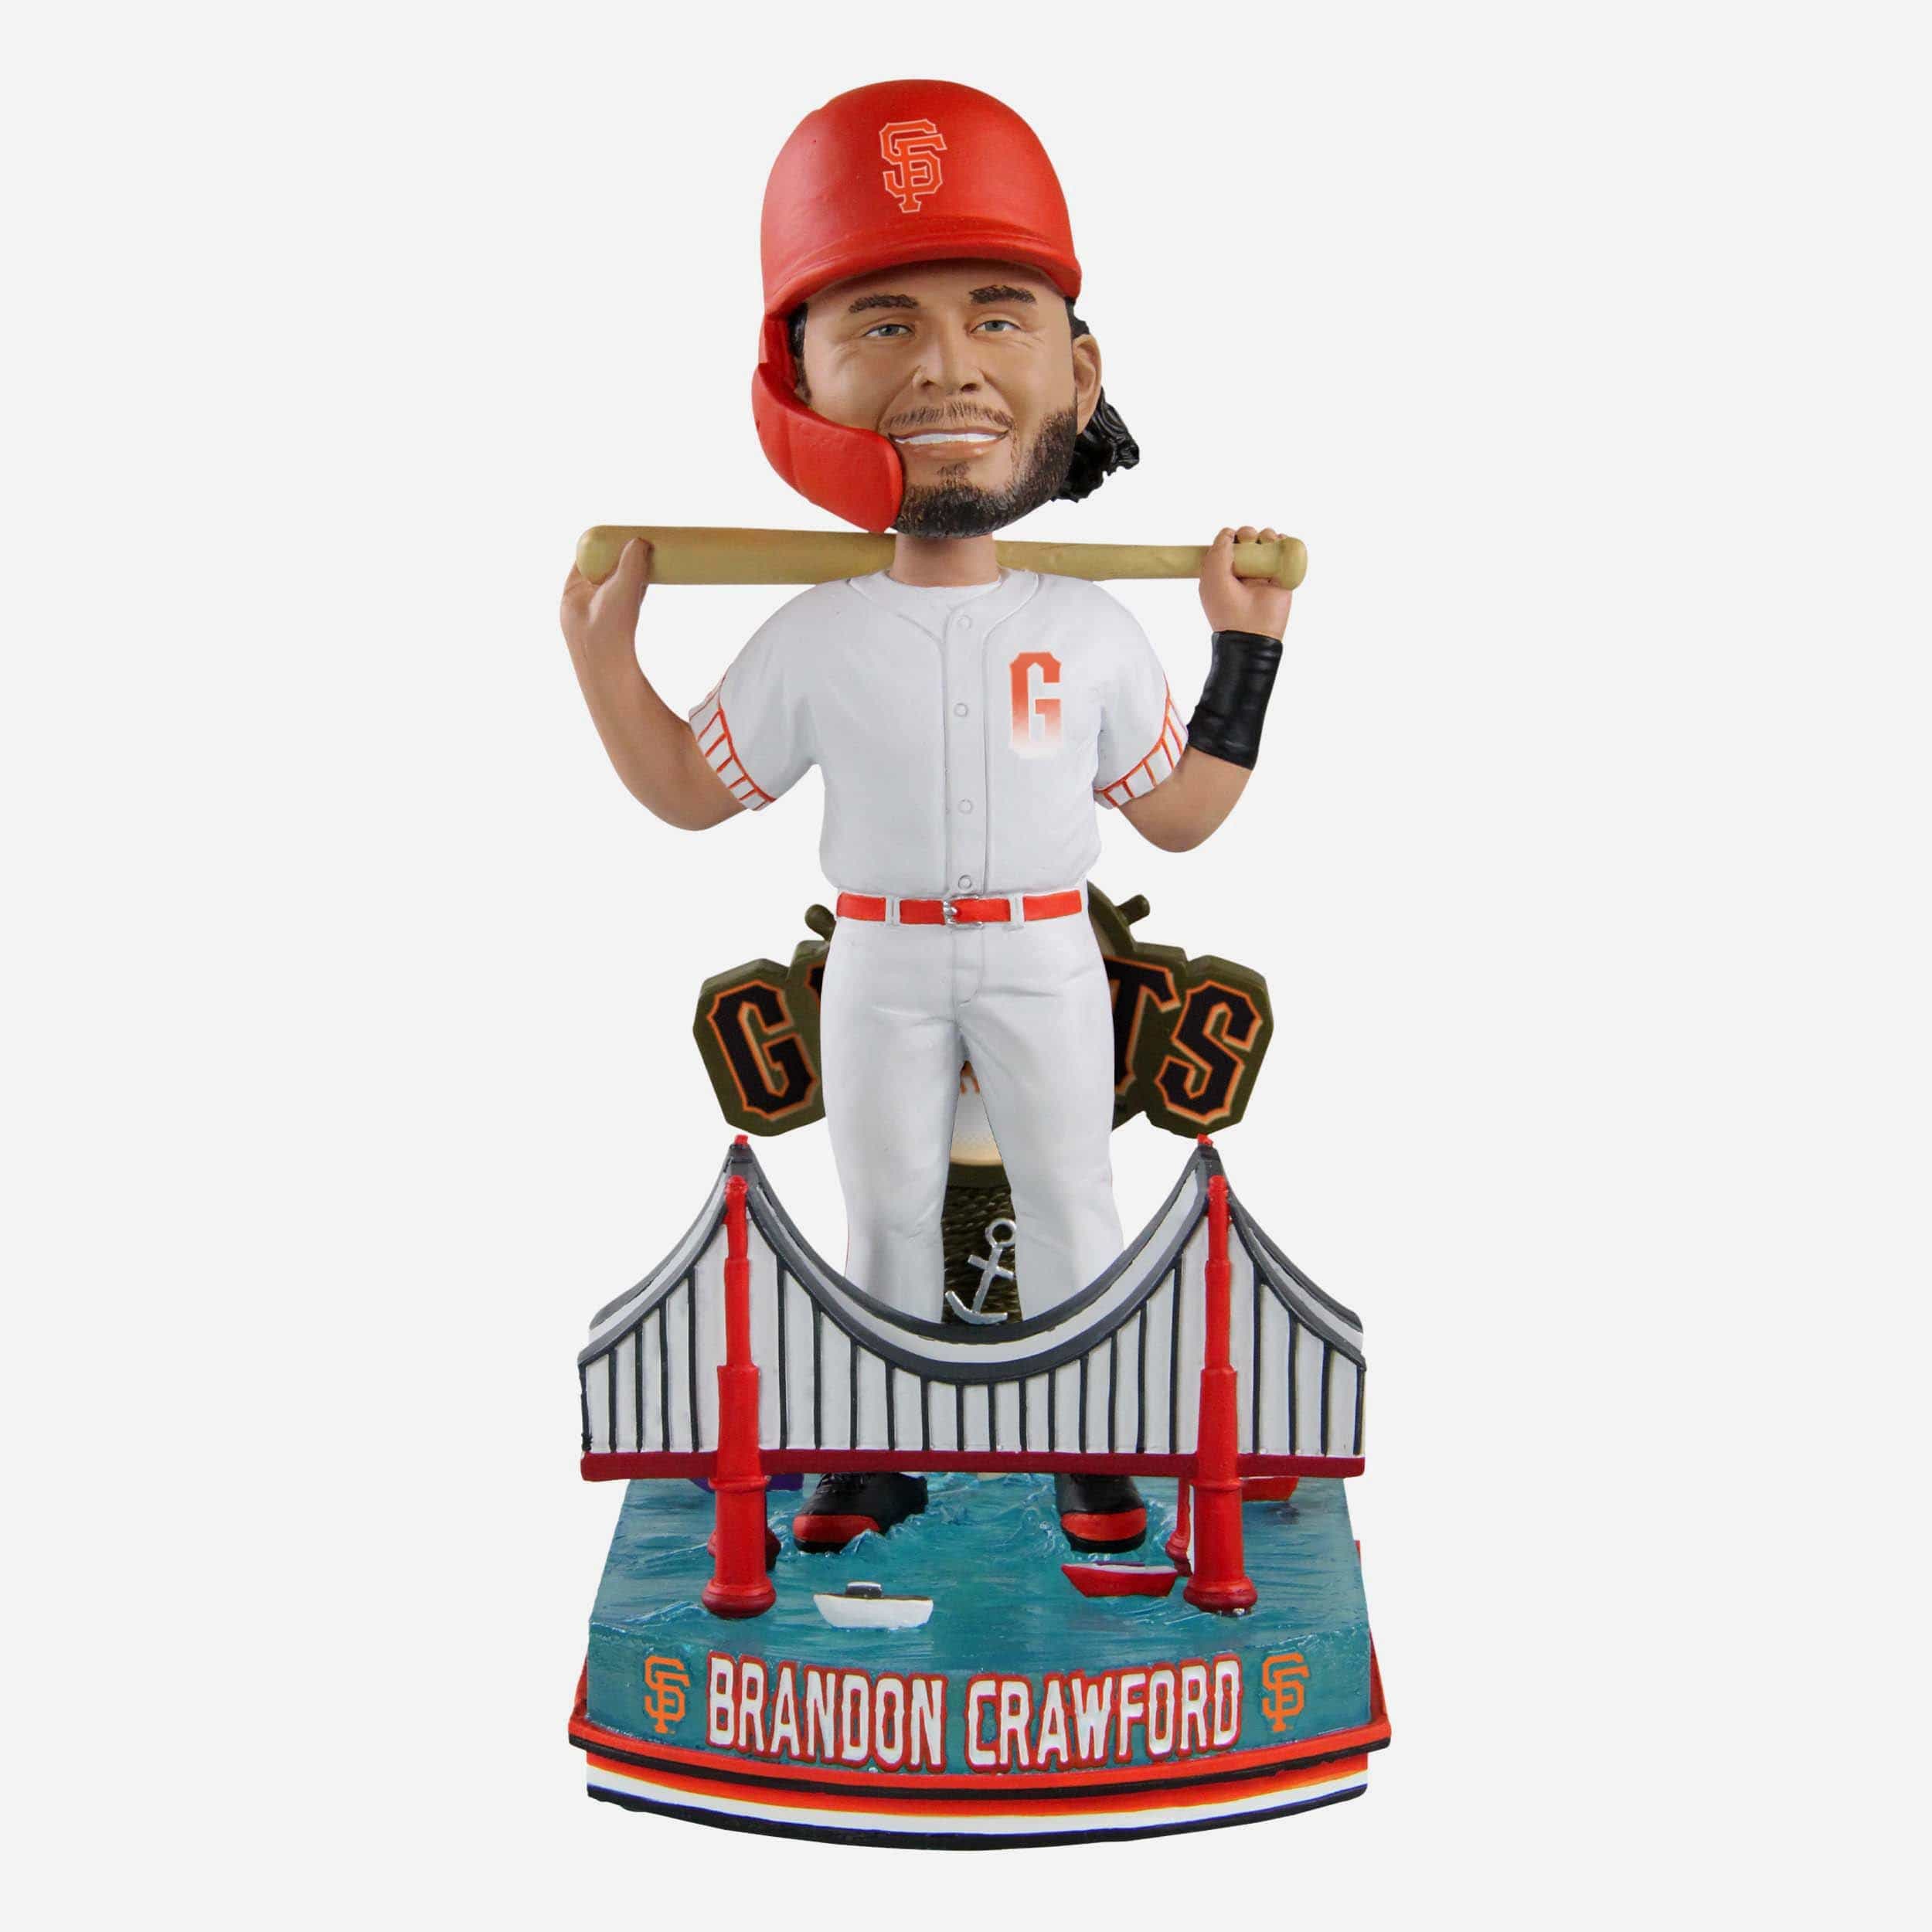 City Connect Bobbleheads Capture Team's Rising Stars